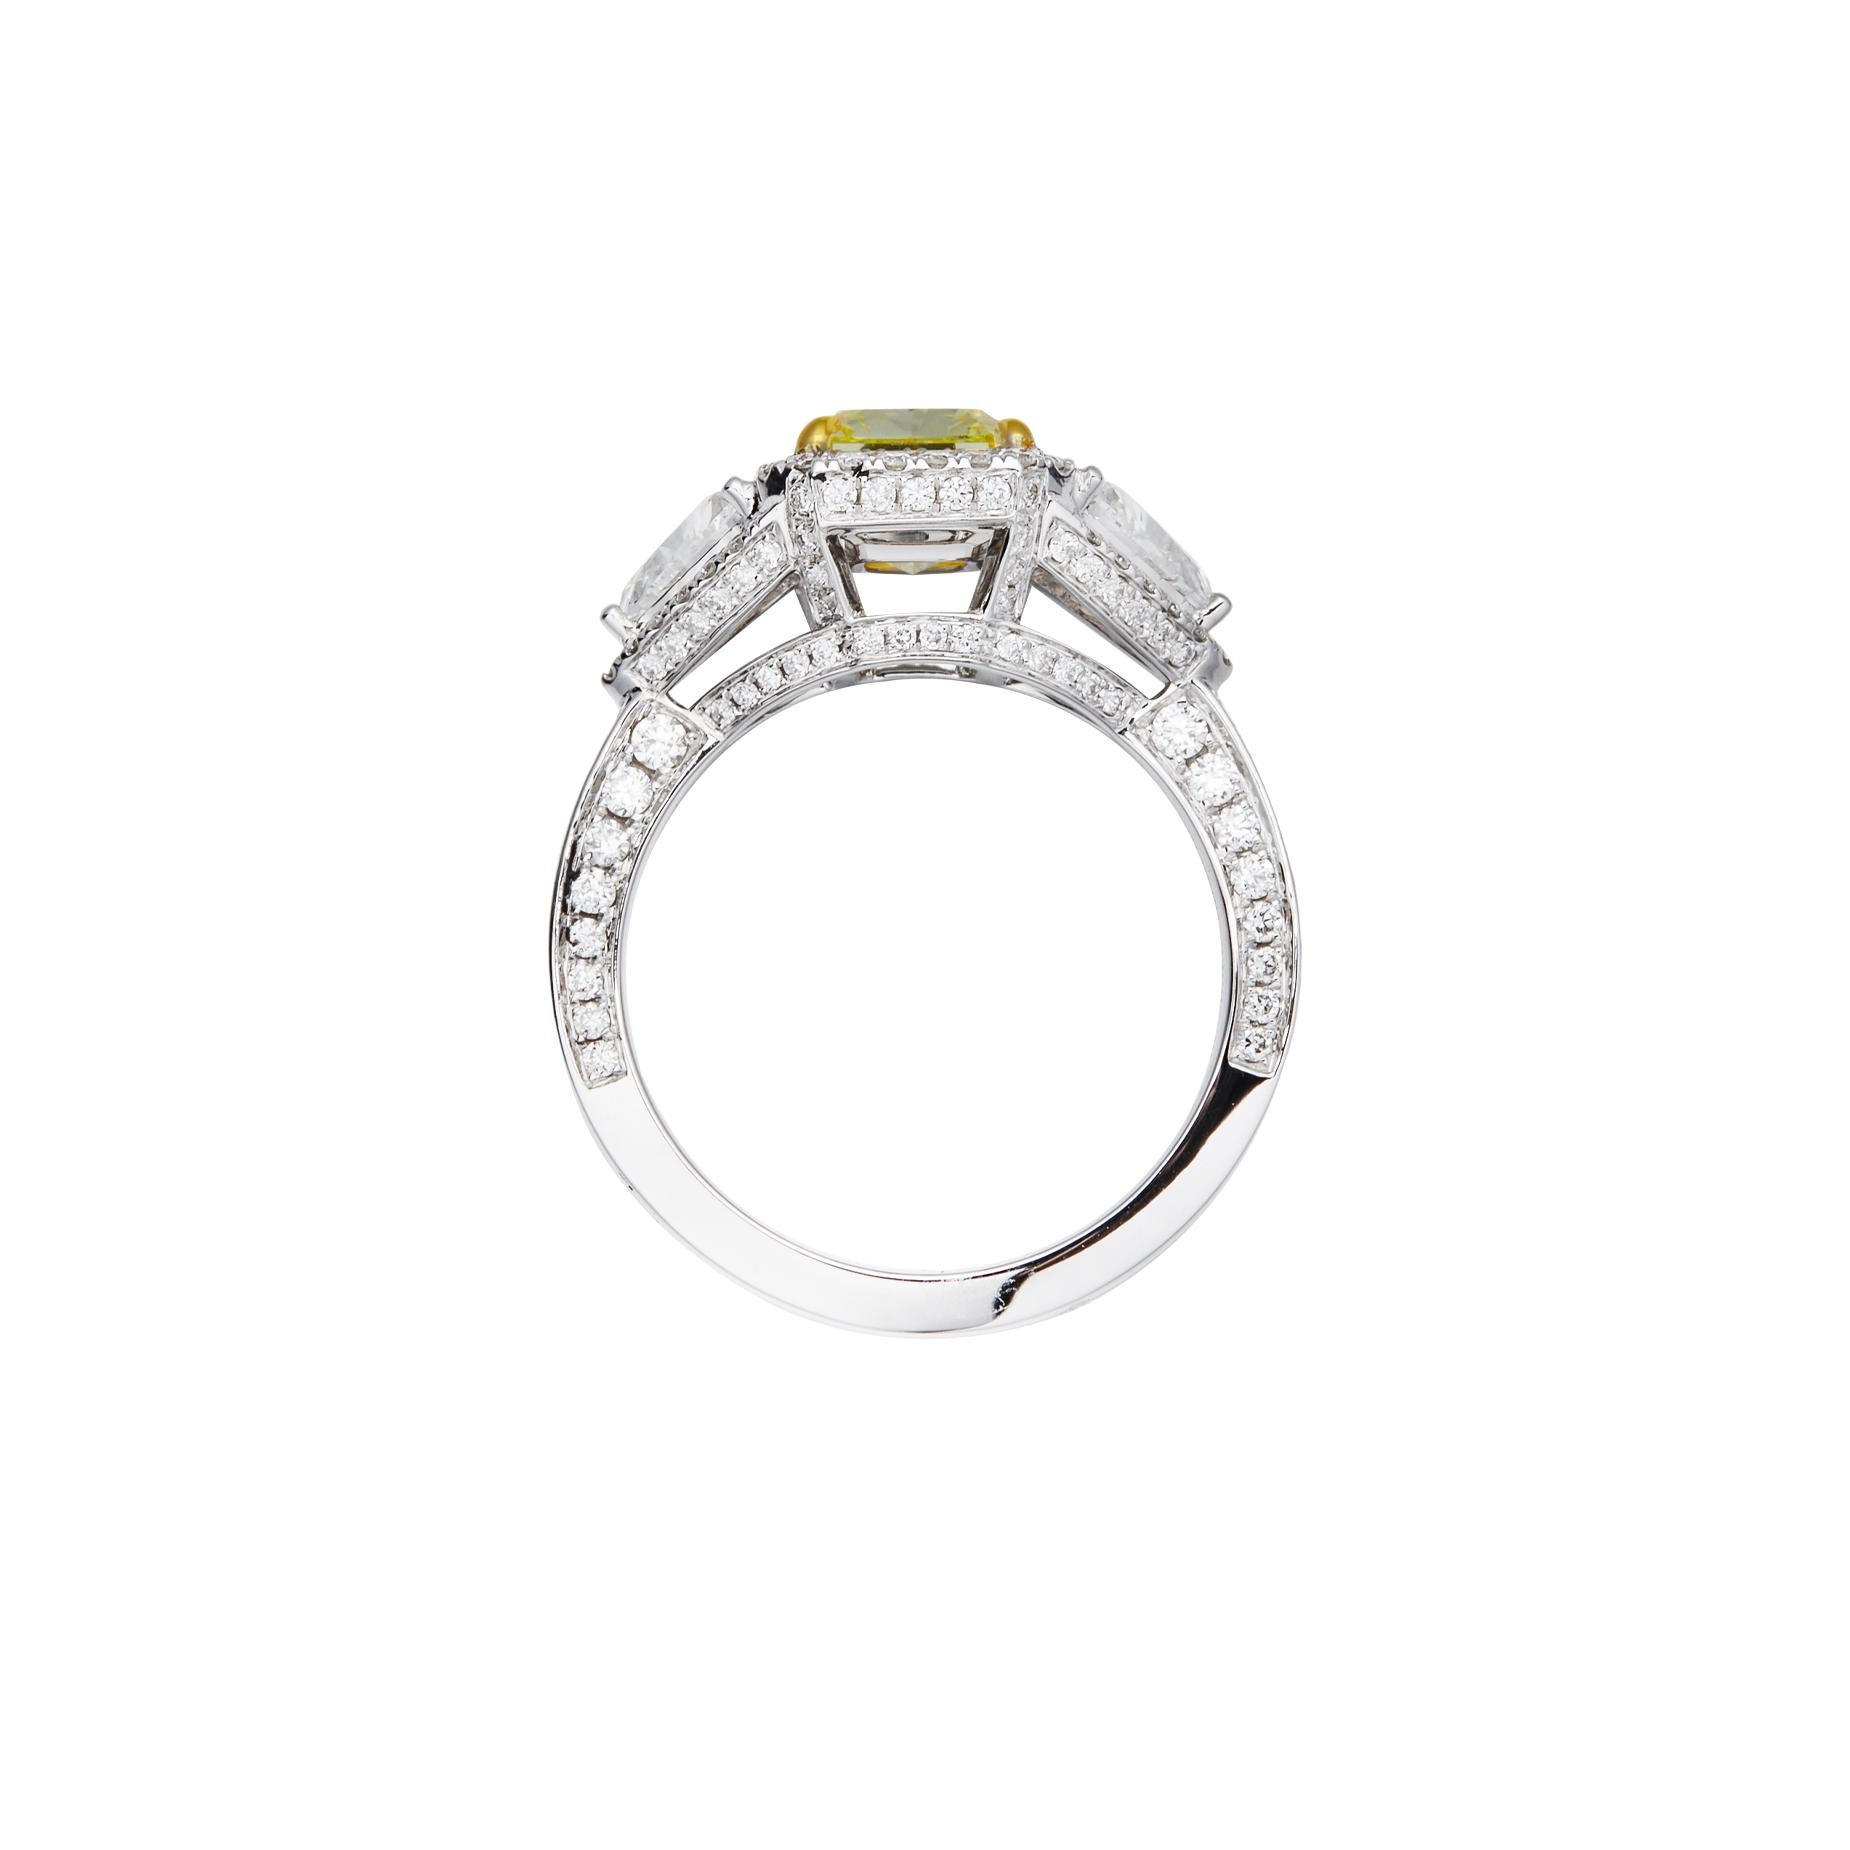 Contemporary GIA Certified, 2.21ct Natural Radiant Cut Fancy Light Yellow Diamond Solitaire